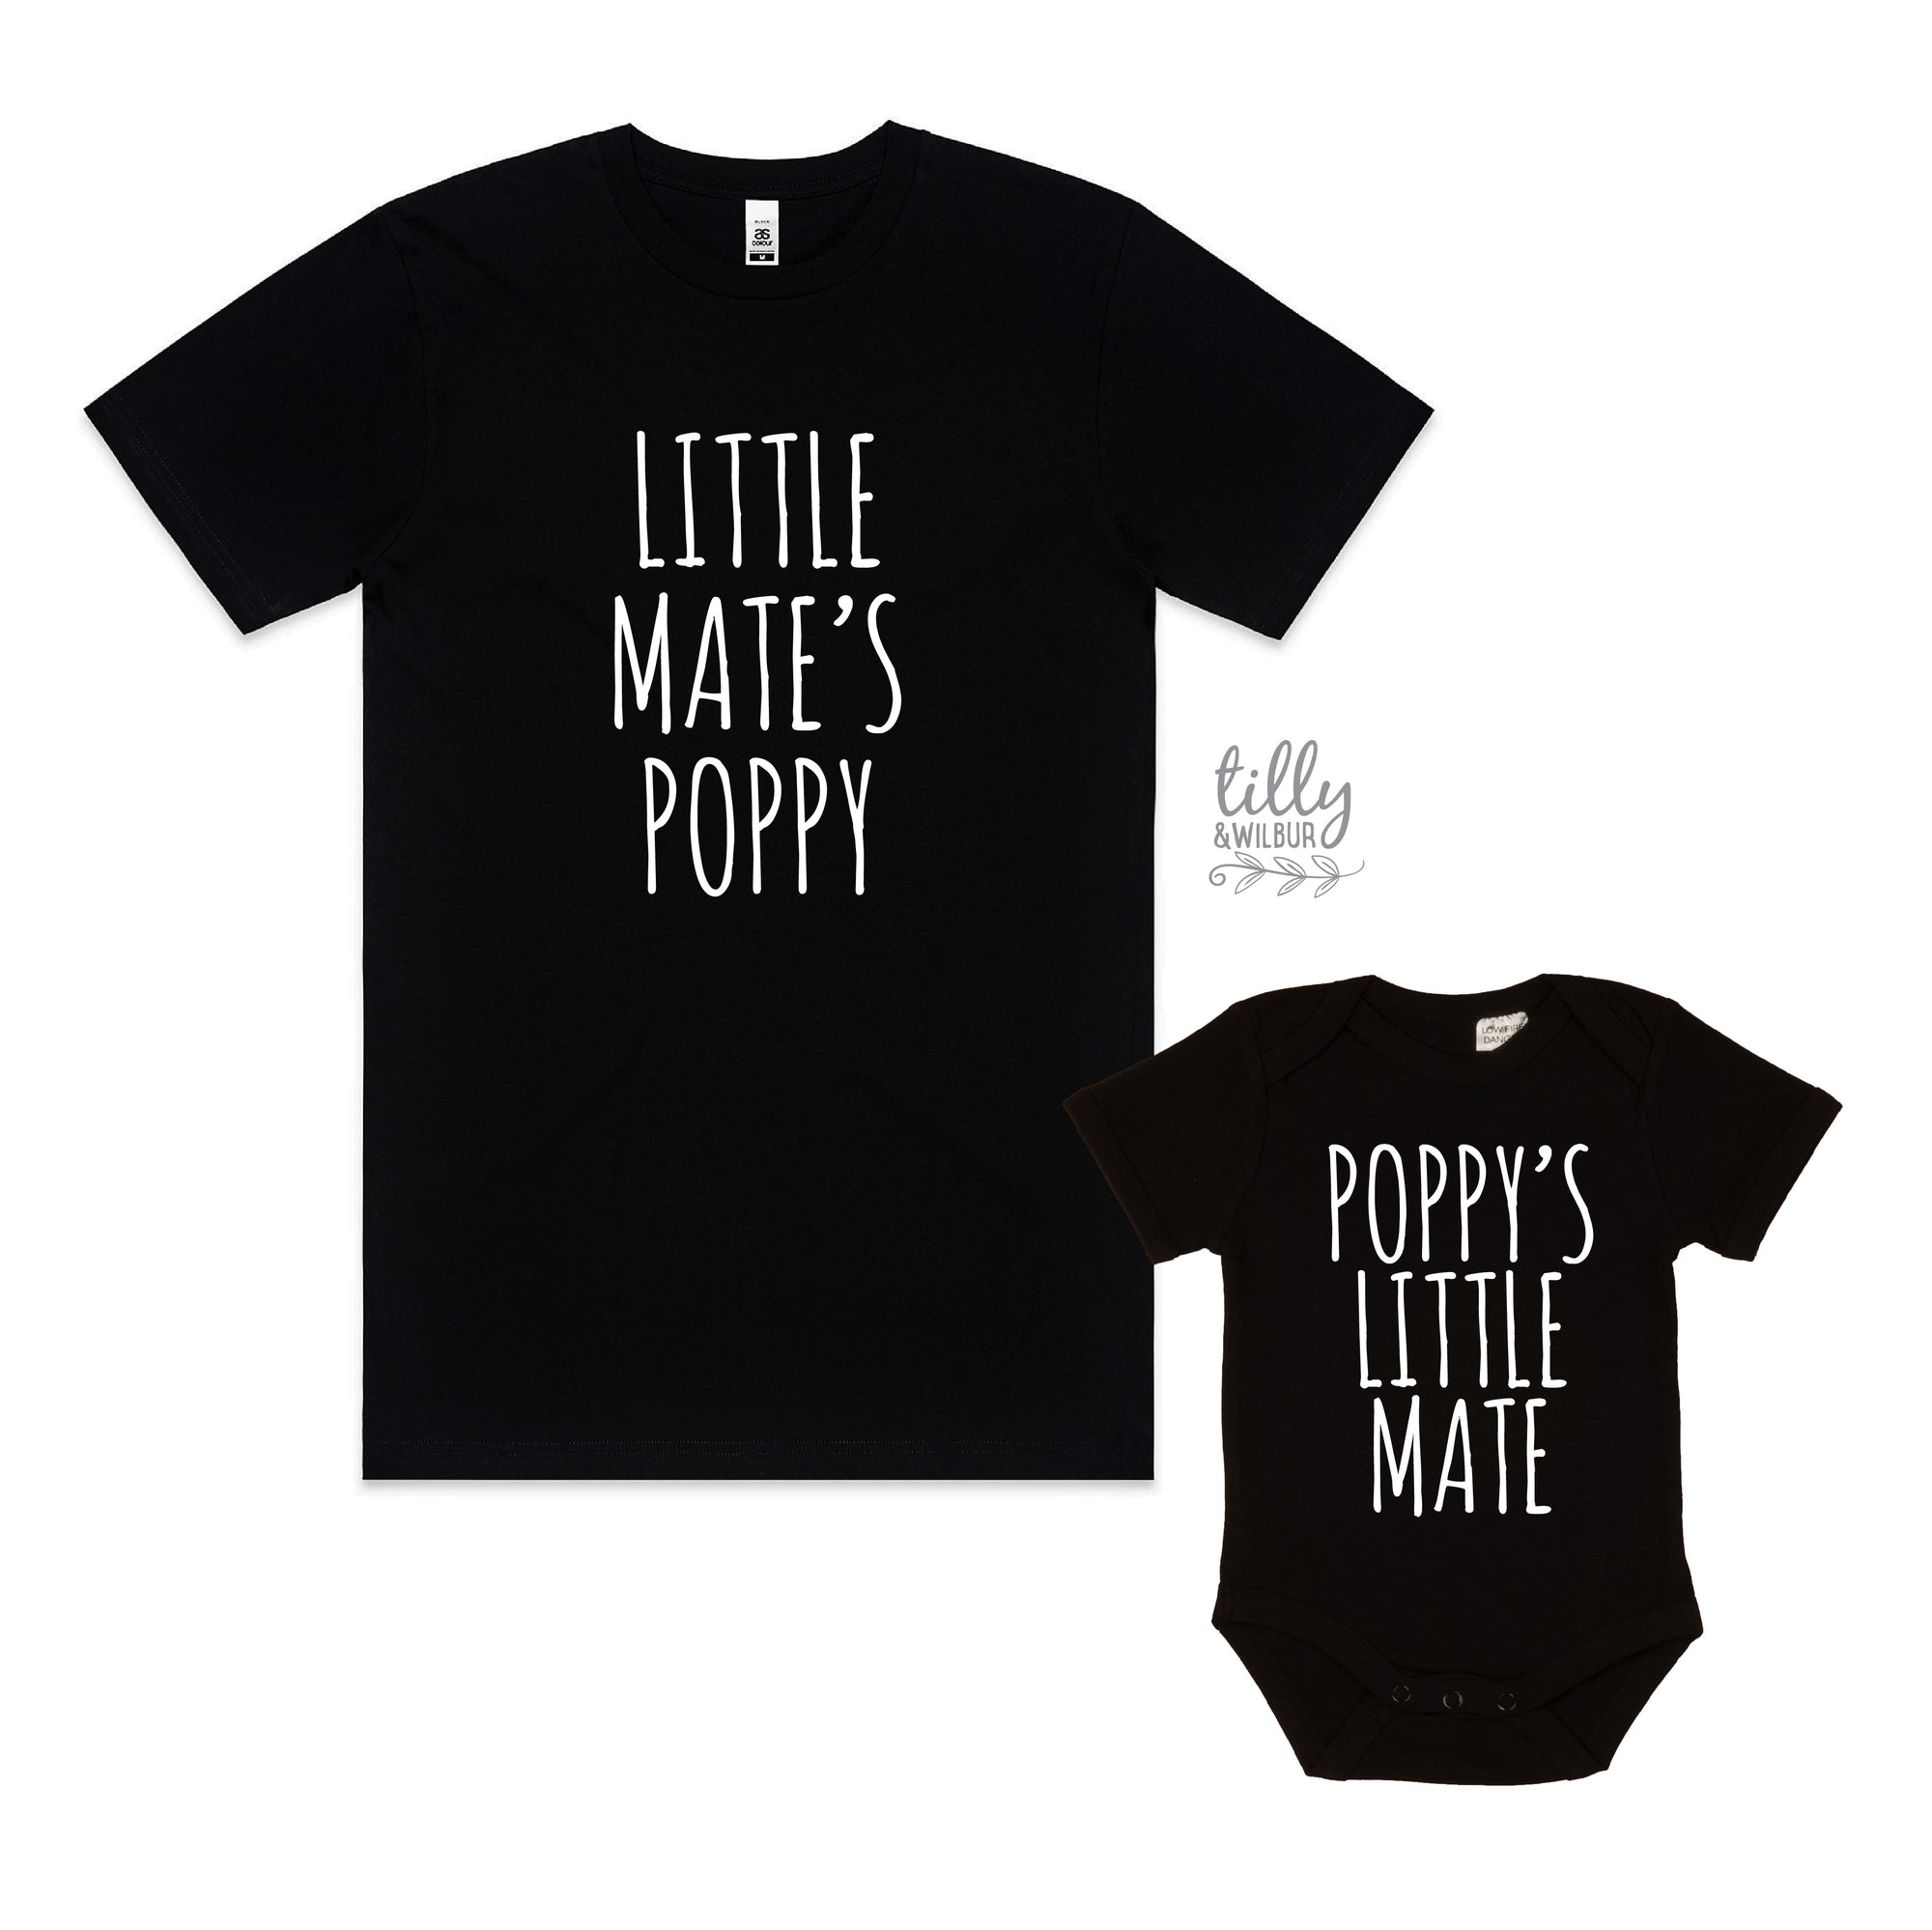 Poppy's Little Mate, Little Mate's Poppy Matching Outfits